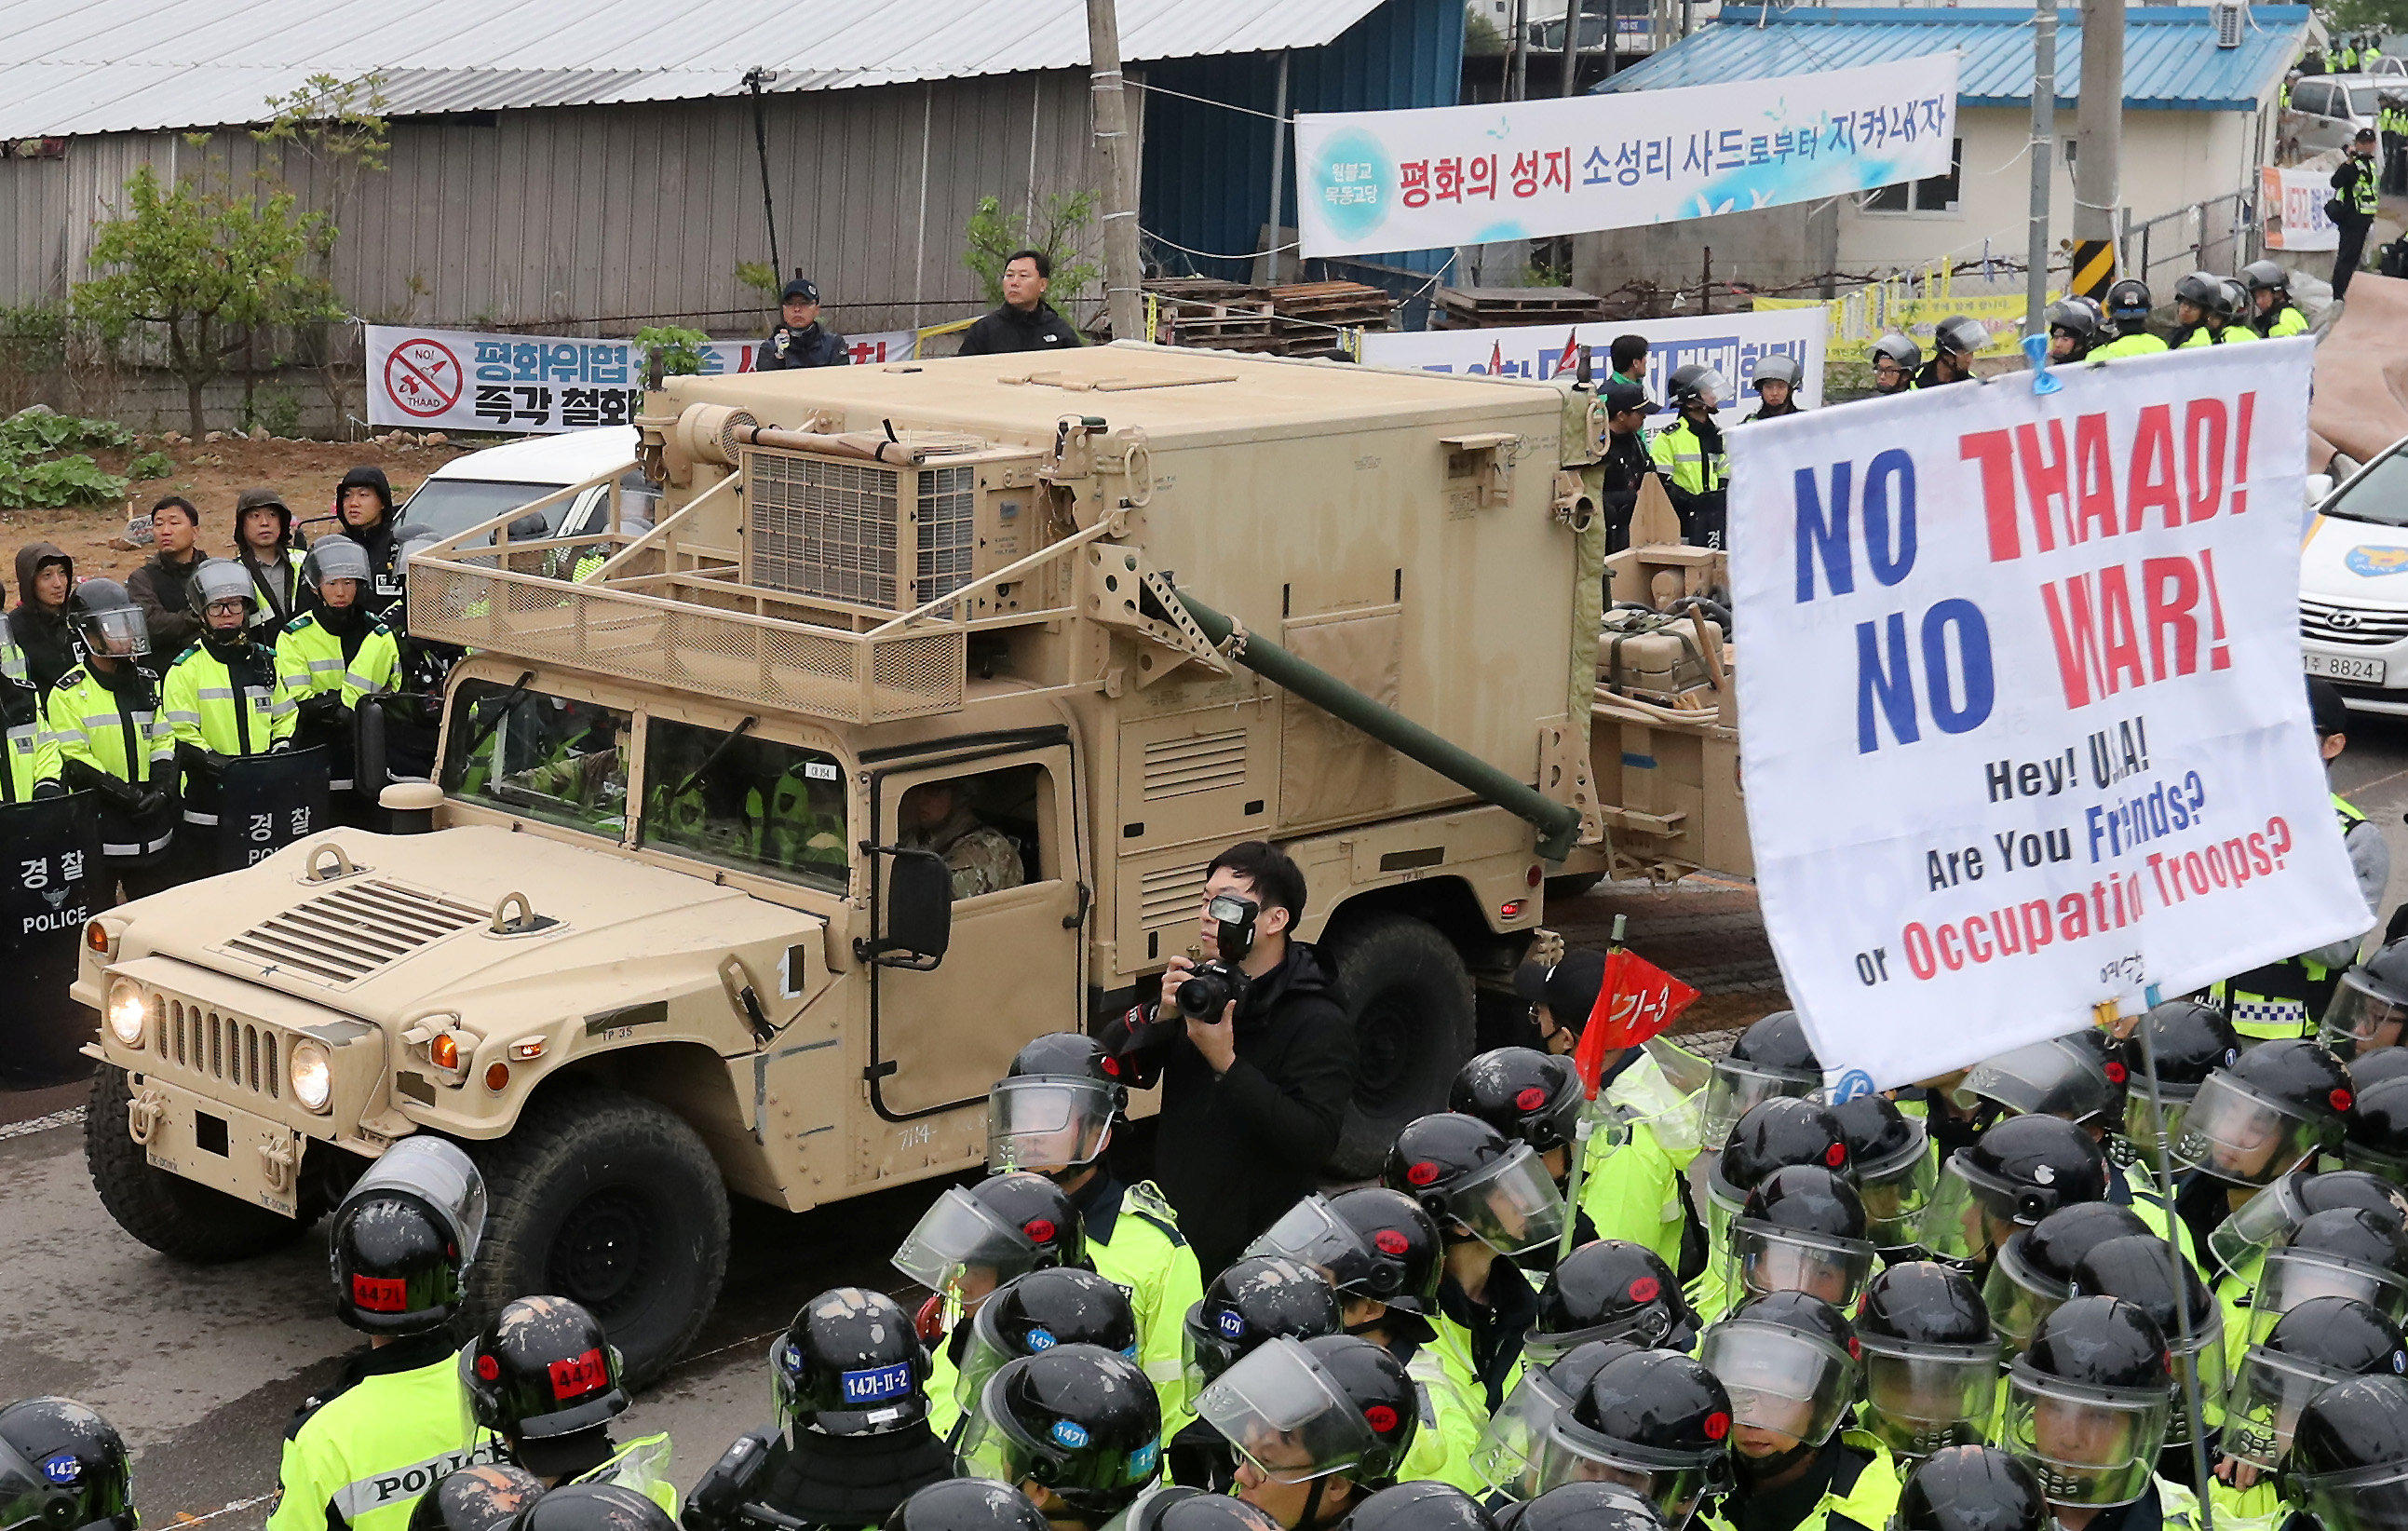 U.S. THAAD anti-missile system aimed at North Korea angers China, draws protests in Seoul - CBS News